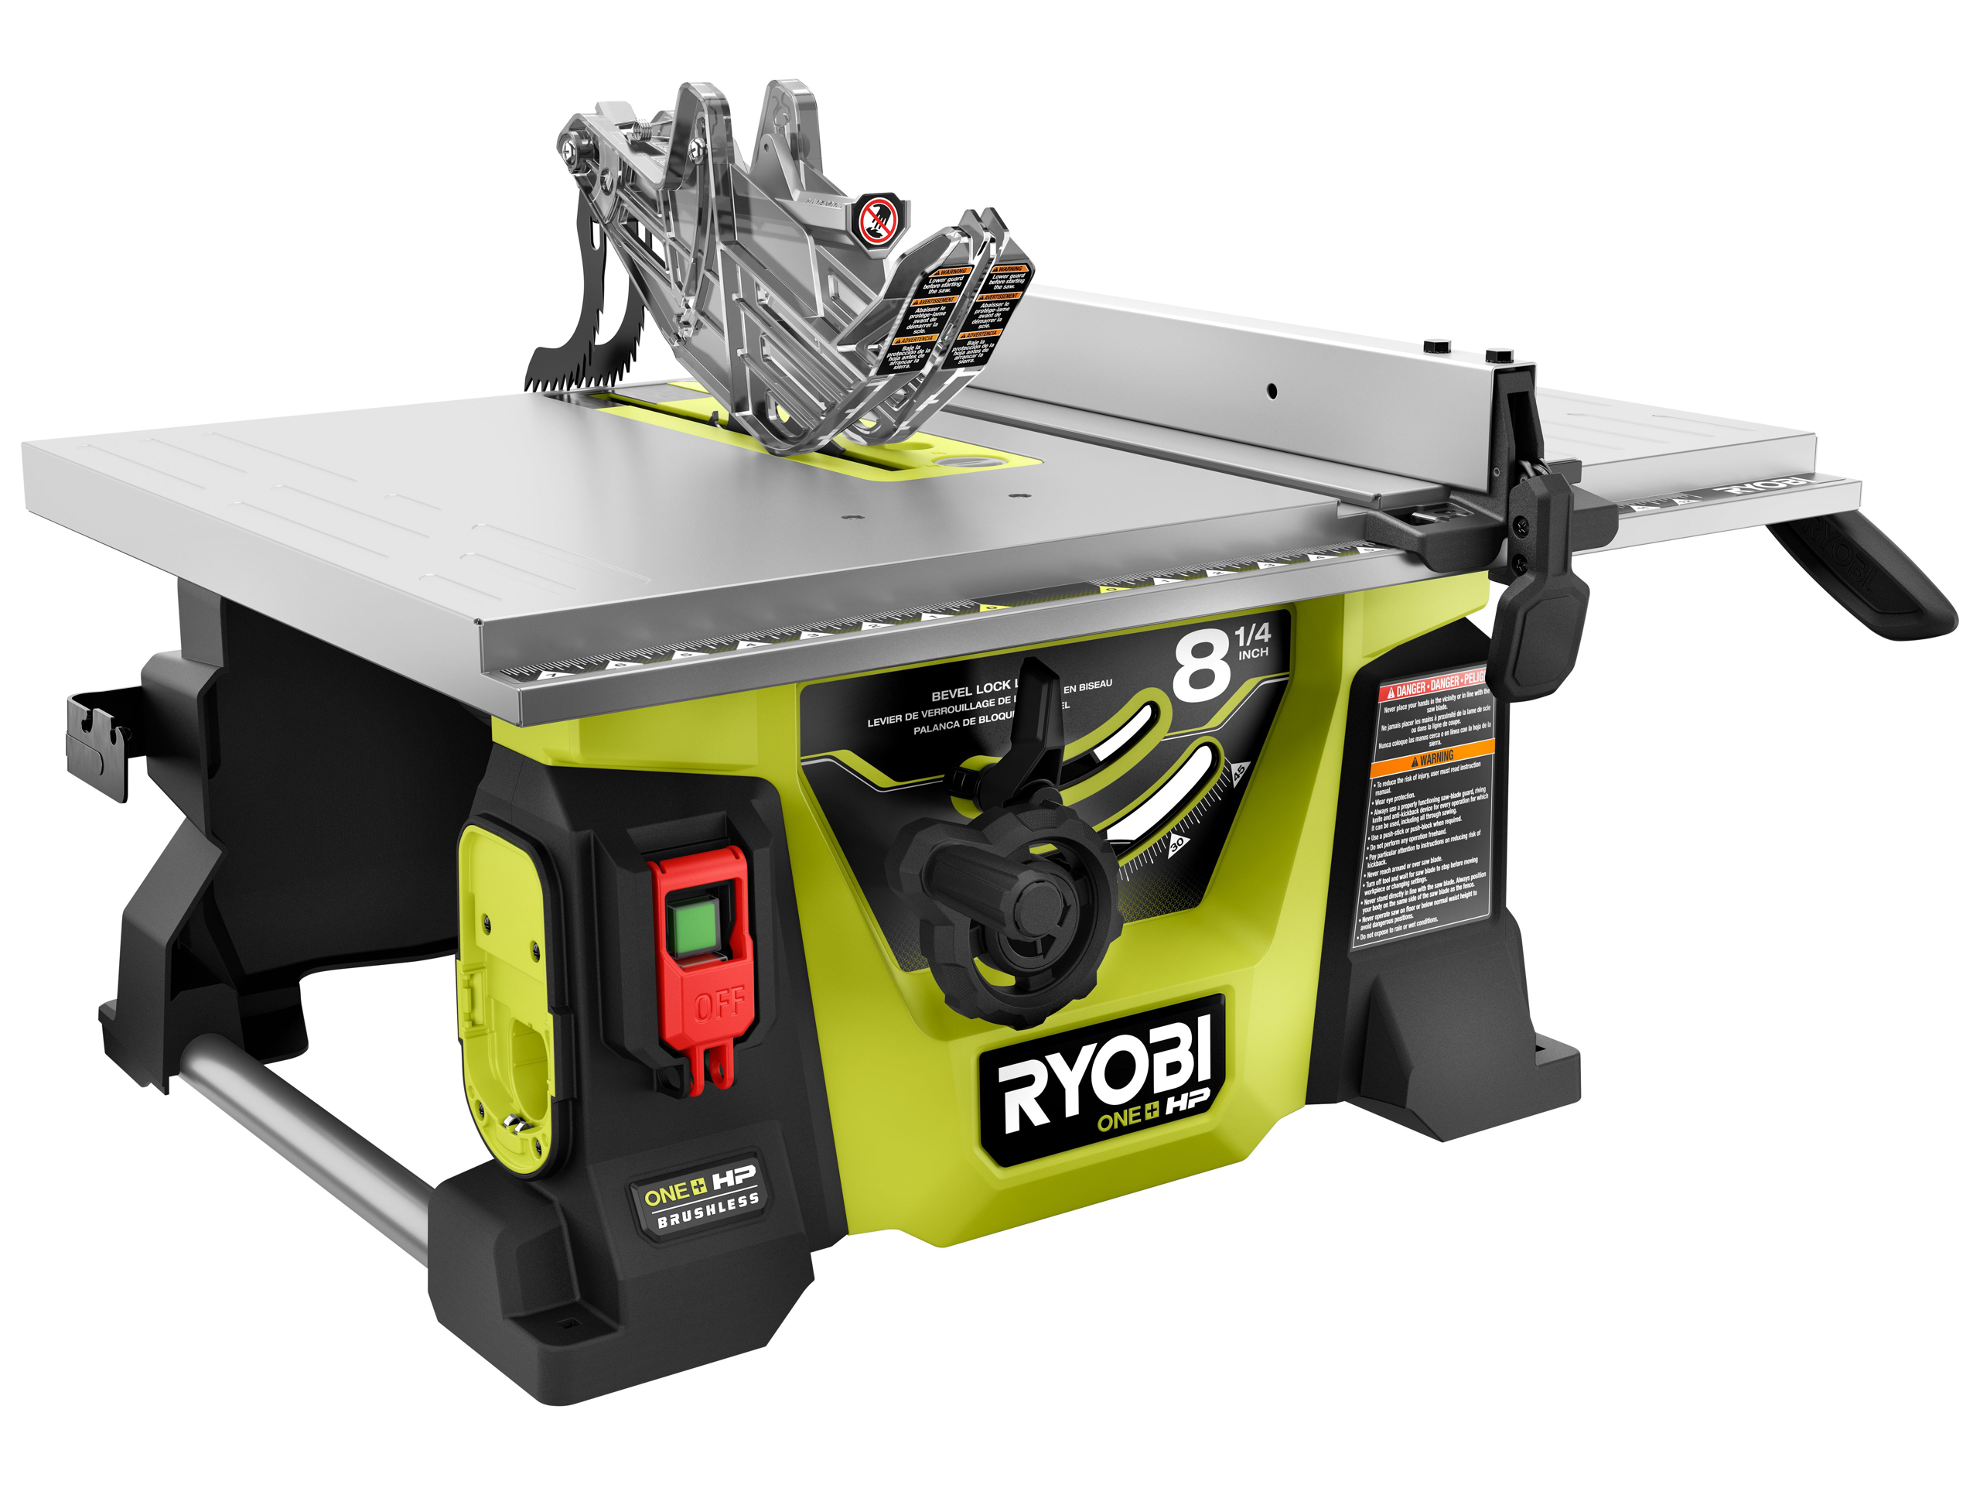 Product Features Image for 18V ONE+ HP BRUSHLESS 8-1/4" TABLE SAW KIT.